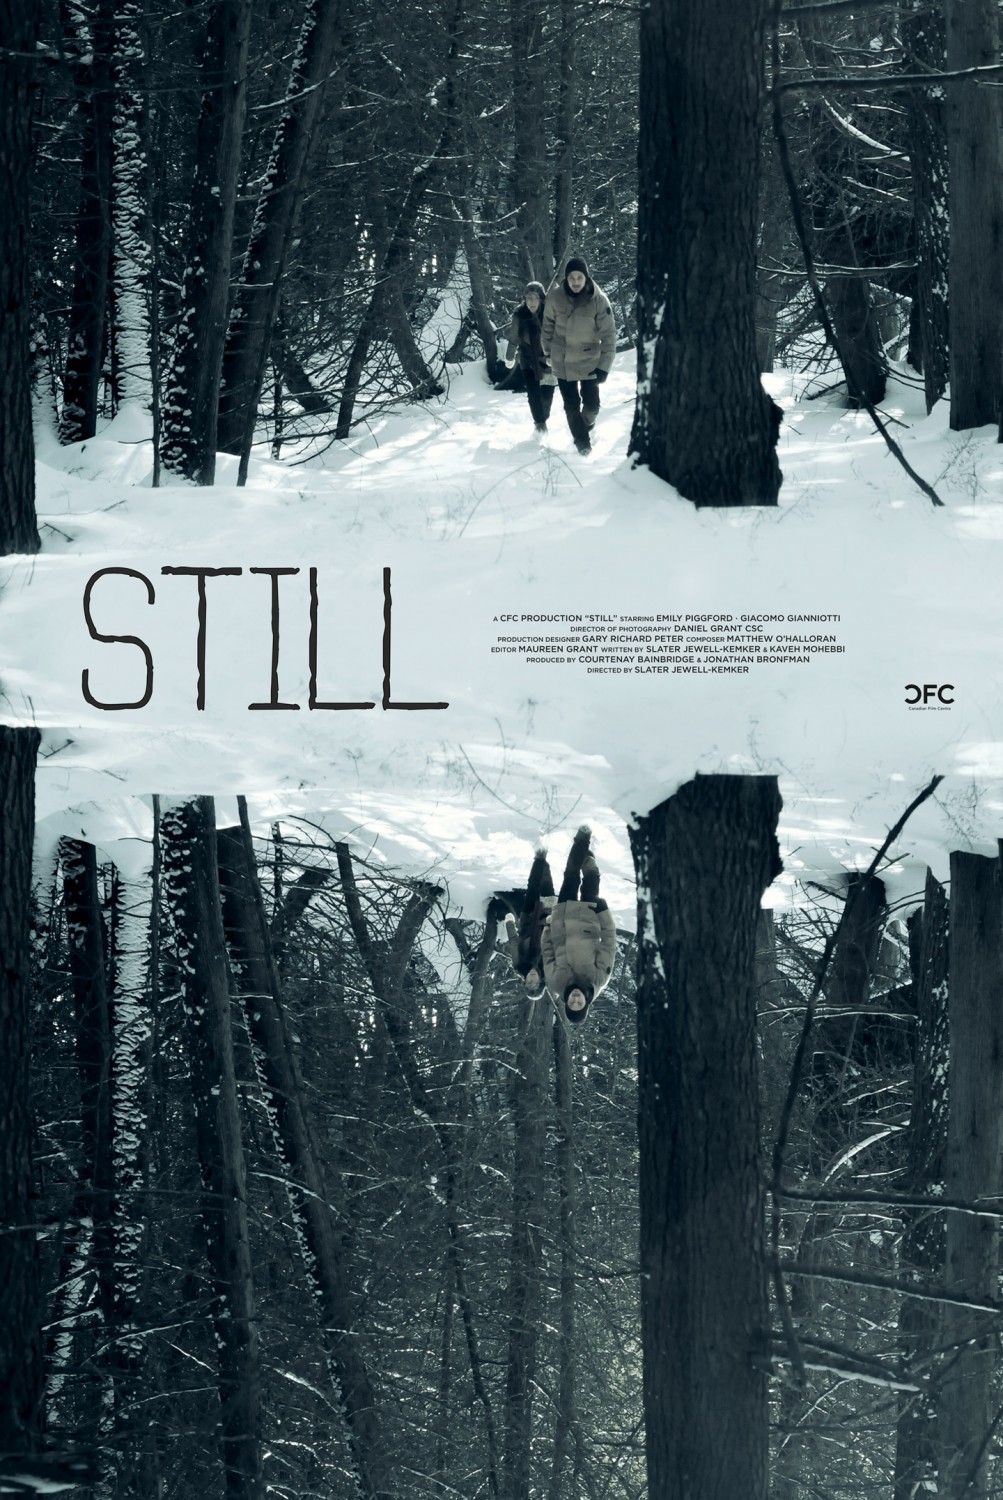 Extra Large Movie Poster Image for Still